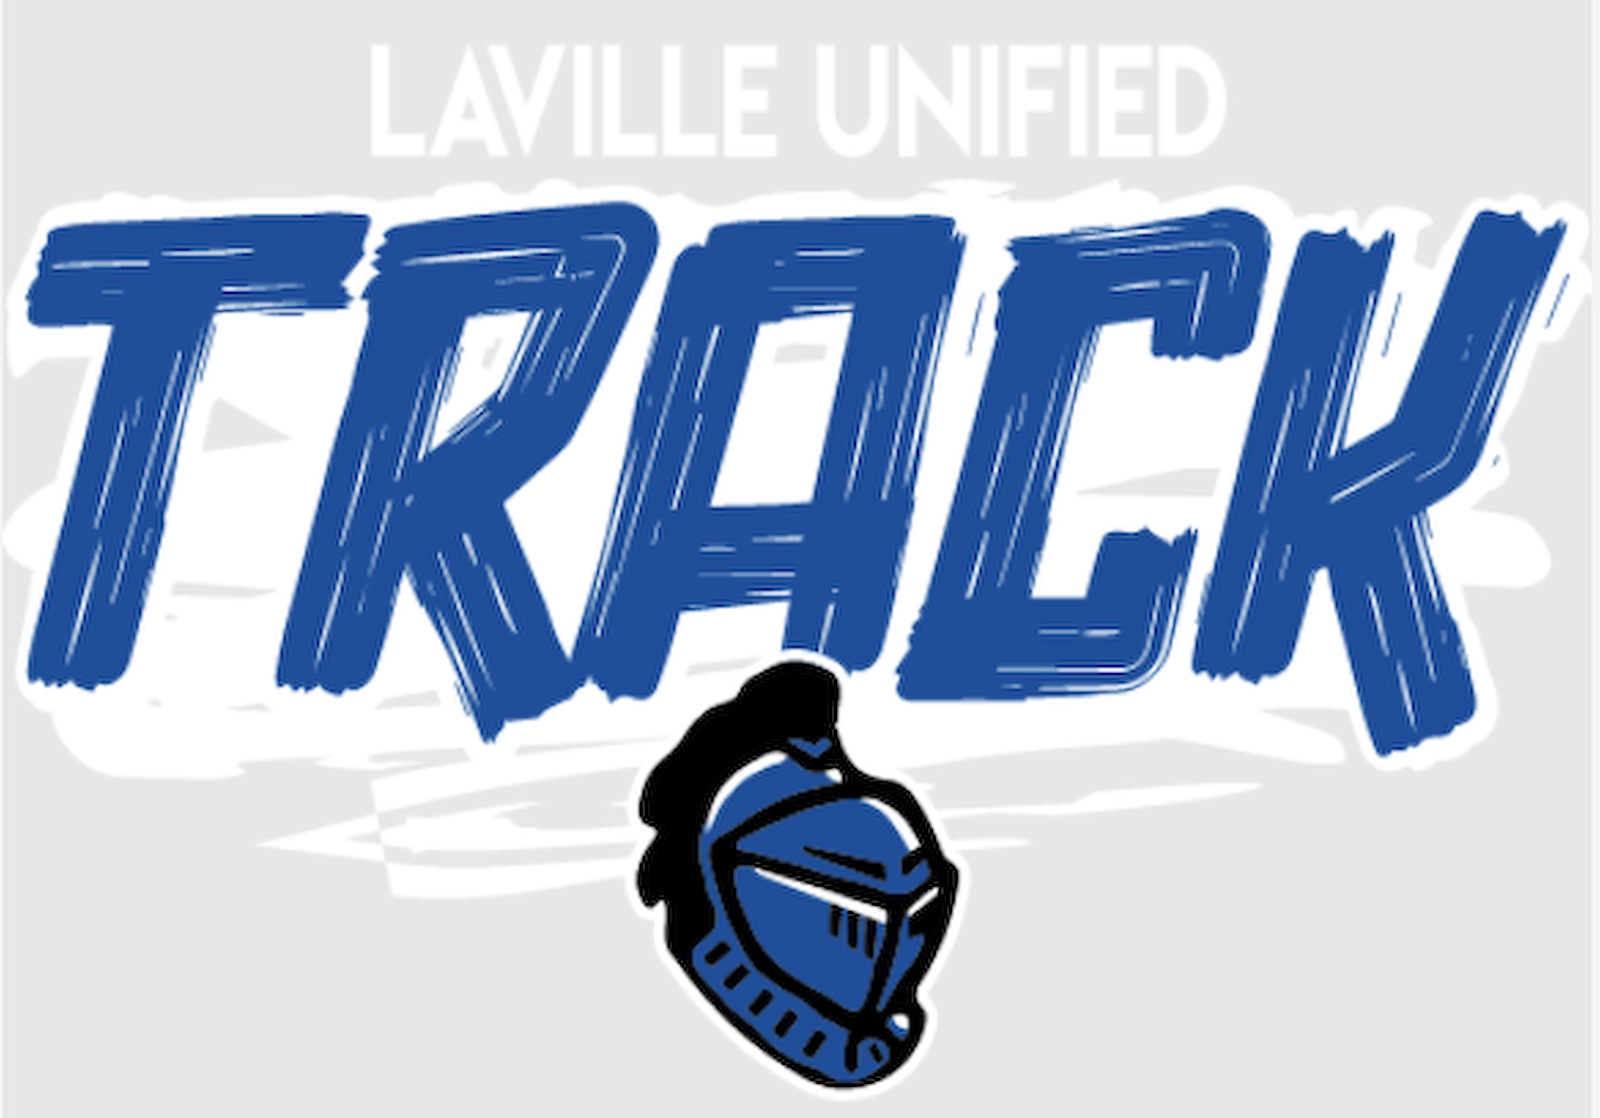 LaVille Unified Track & Field Apparel cover photo